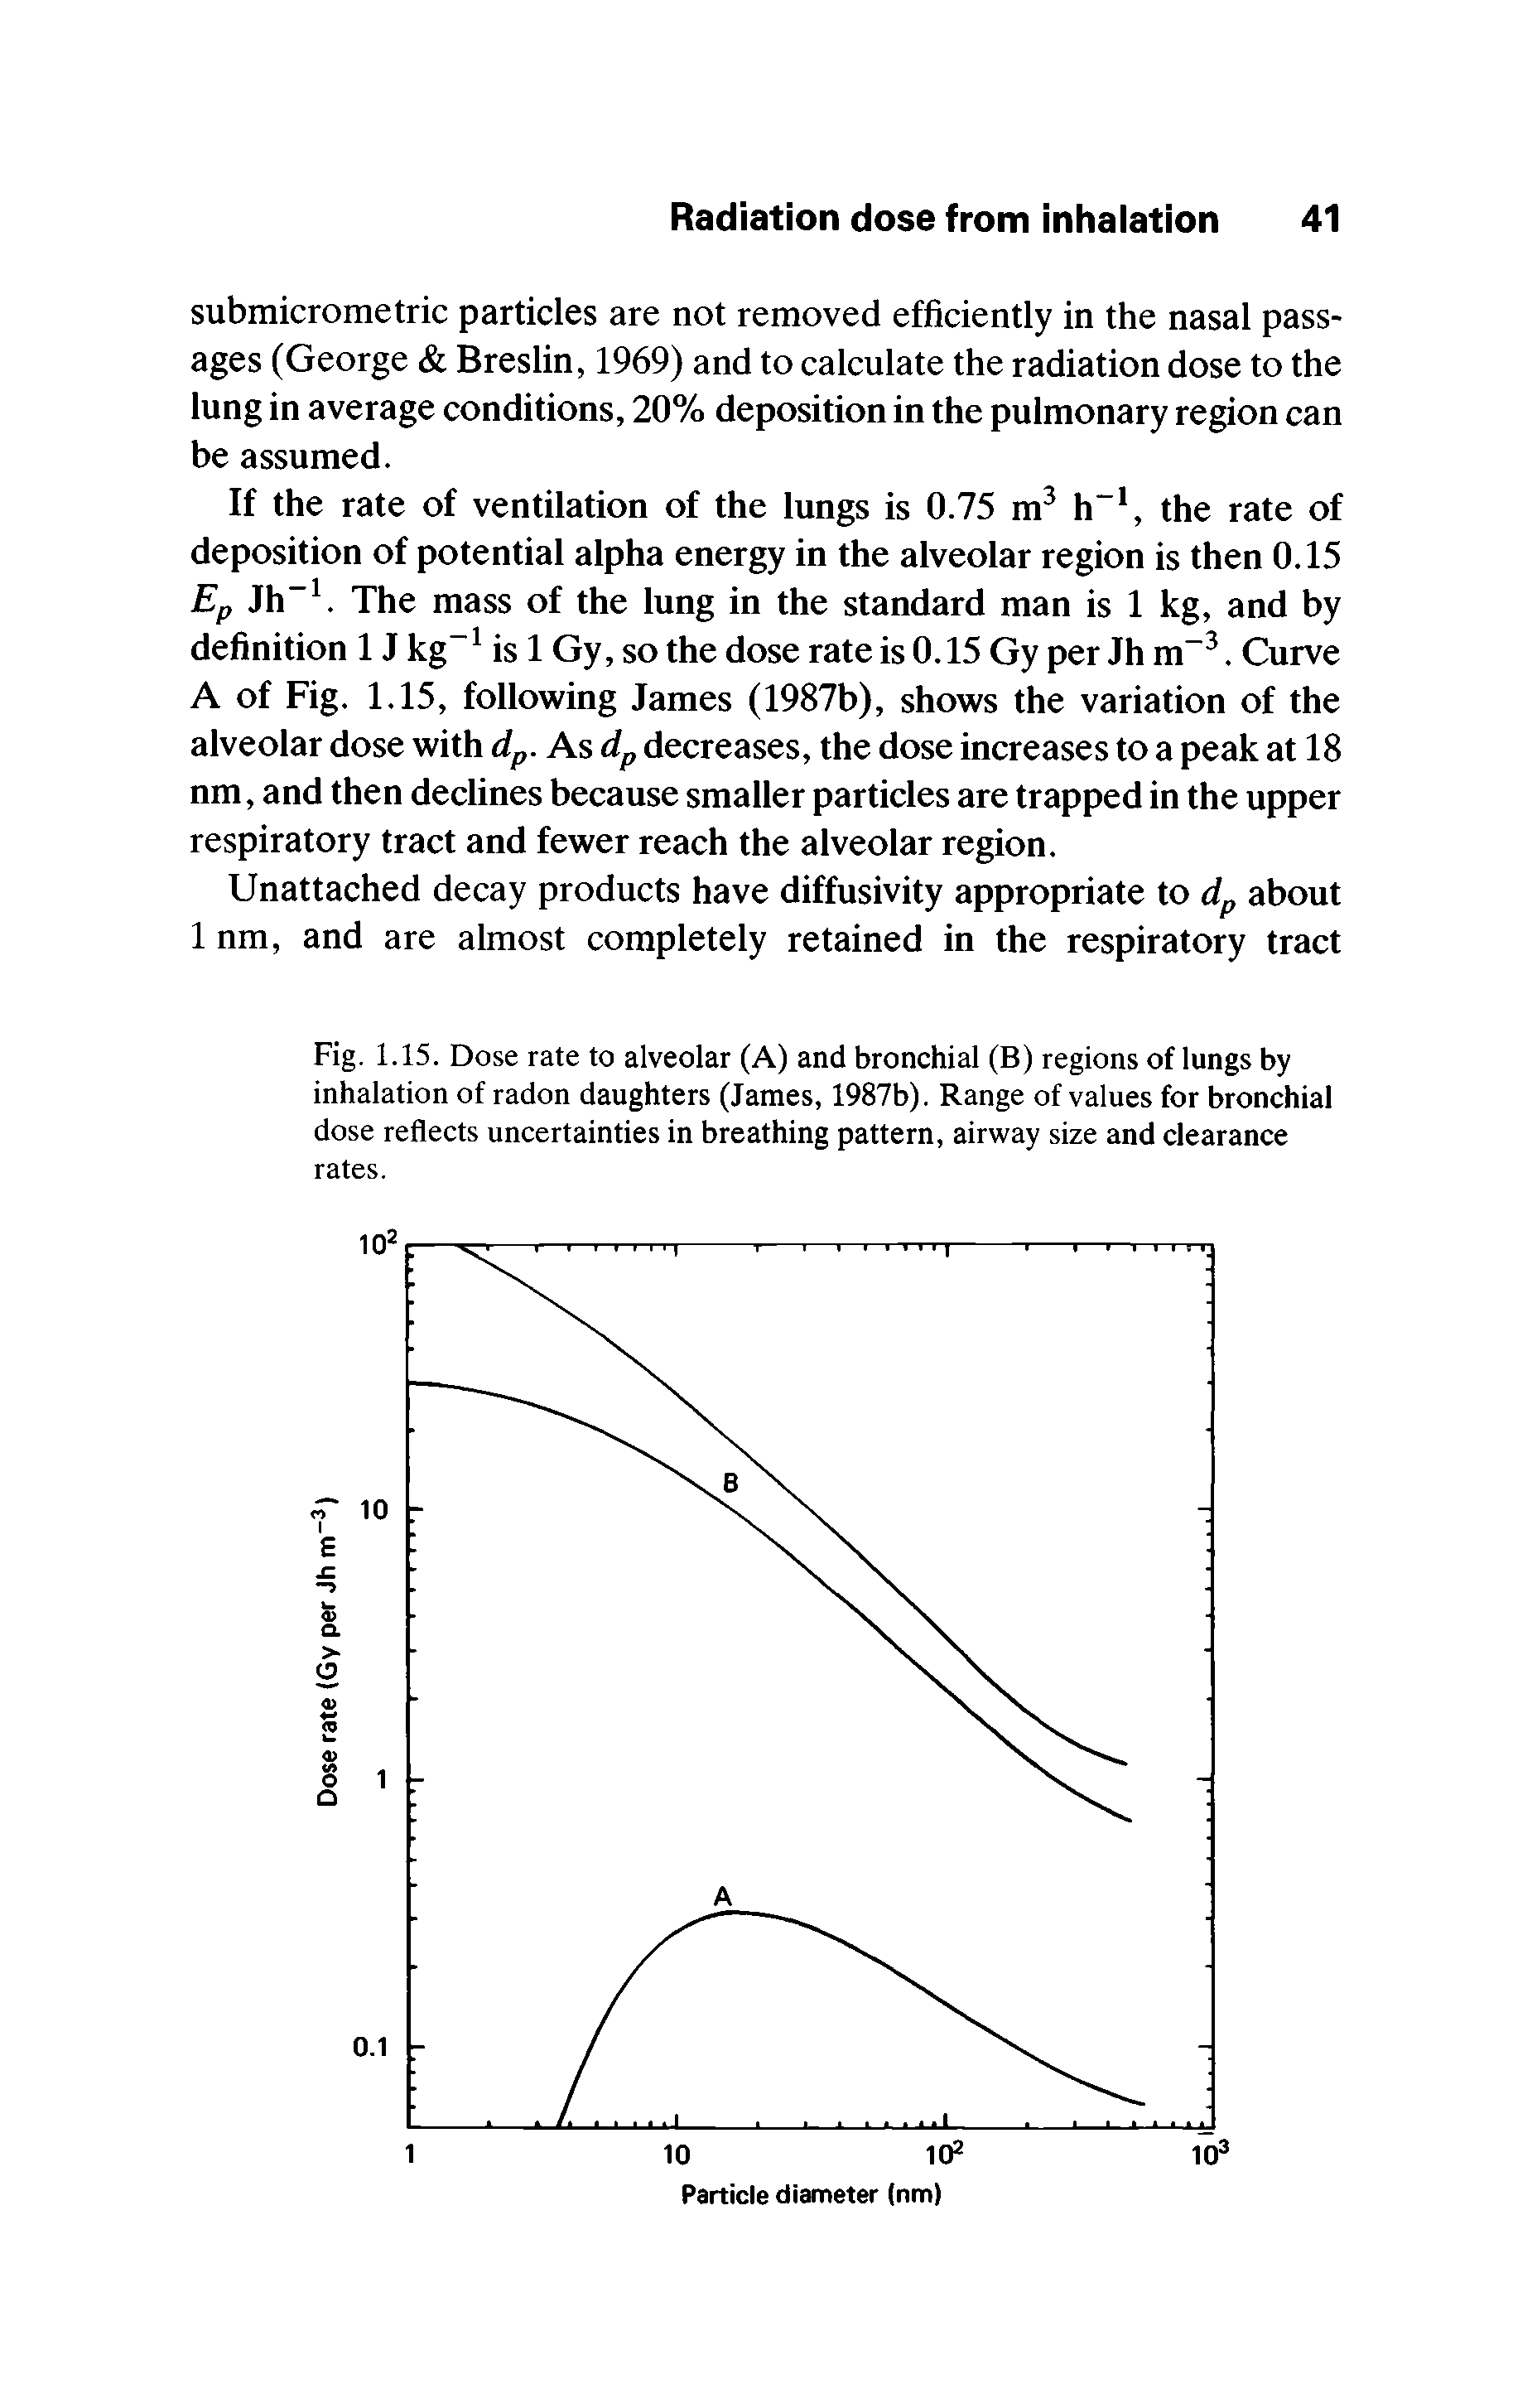 Fig. 1.15. Dose rate to alveolar (A) and bronchial (B) regions of lungs by inhalation of radon daughters (James, 1987b). Range of values for bronchial dose reflects uncertainties in breathing pattern, airway size and clearance rates.